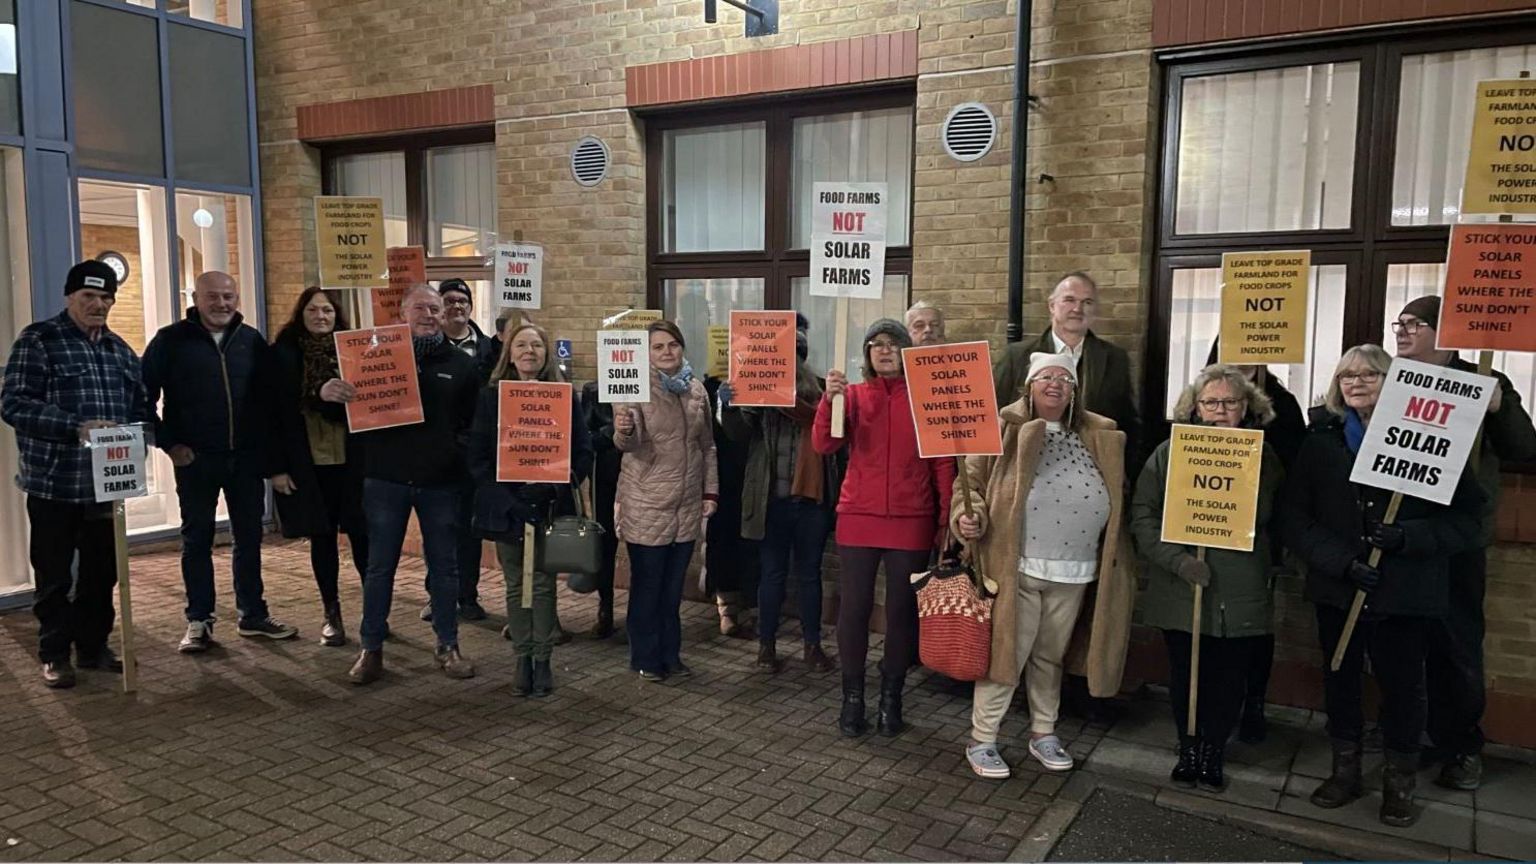 Campaigners outside the council meeting 